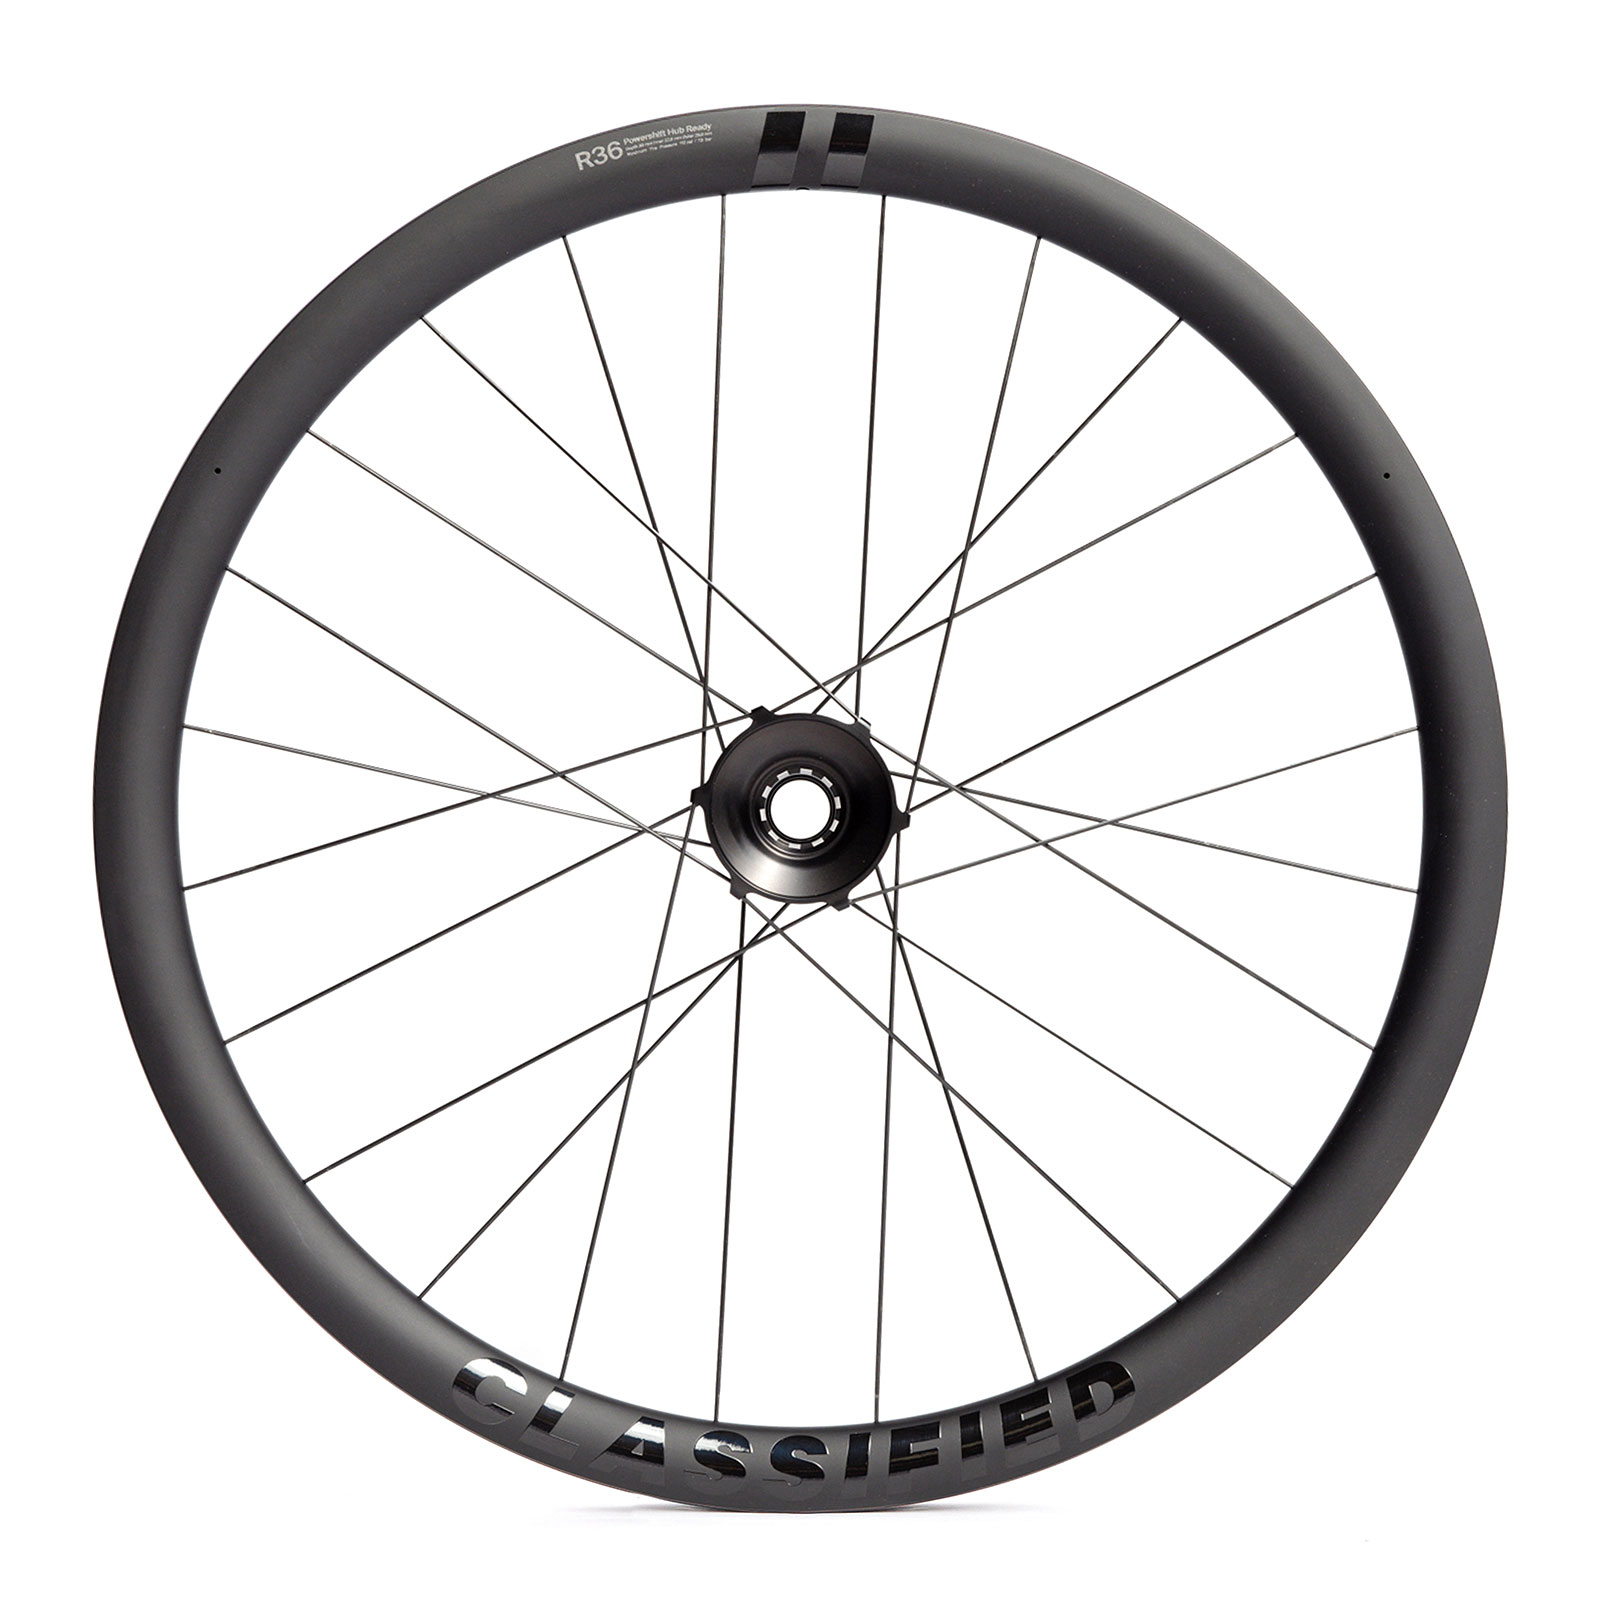 Classified Wheels, wider more aero R36, R50 & G42 gravel and road bike wheelsets for Powershift internally geared hubs, R36